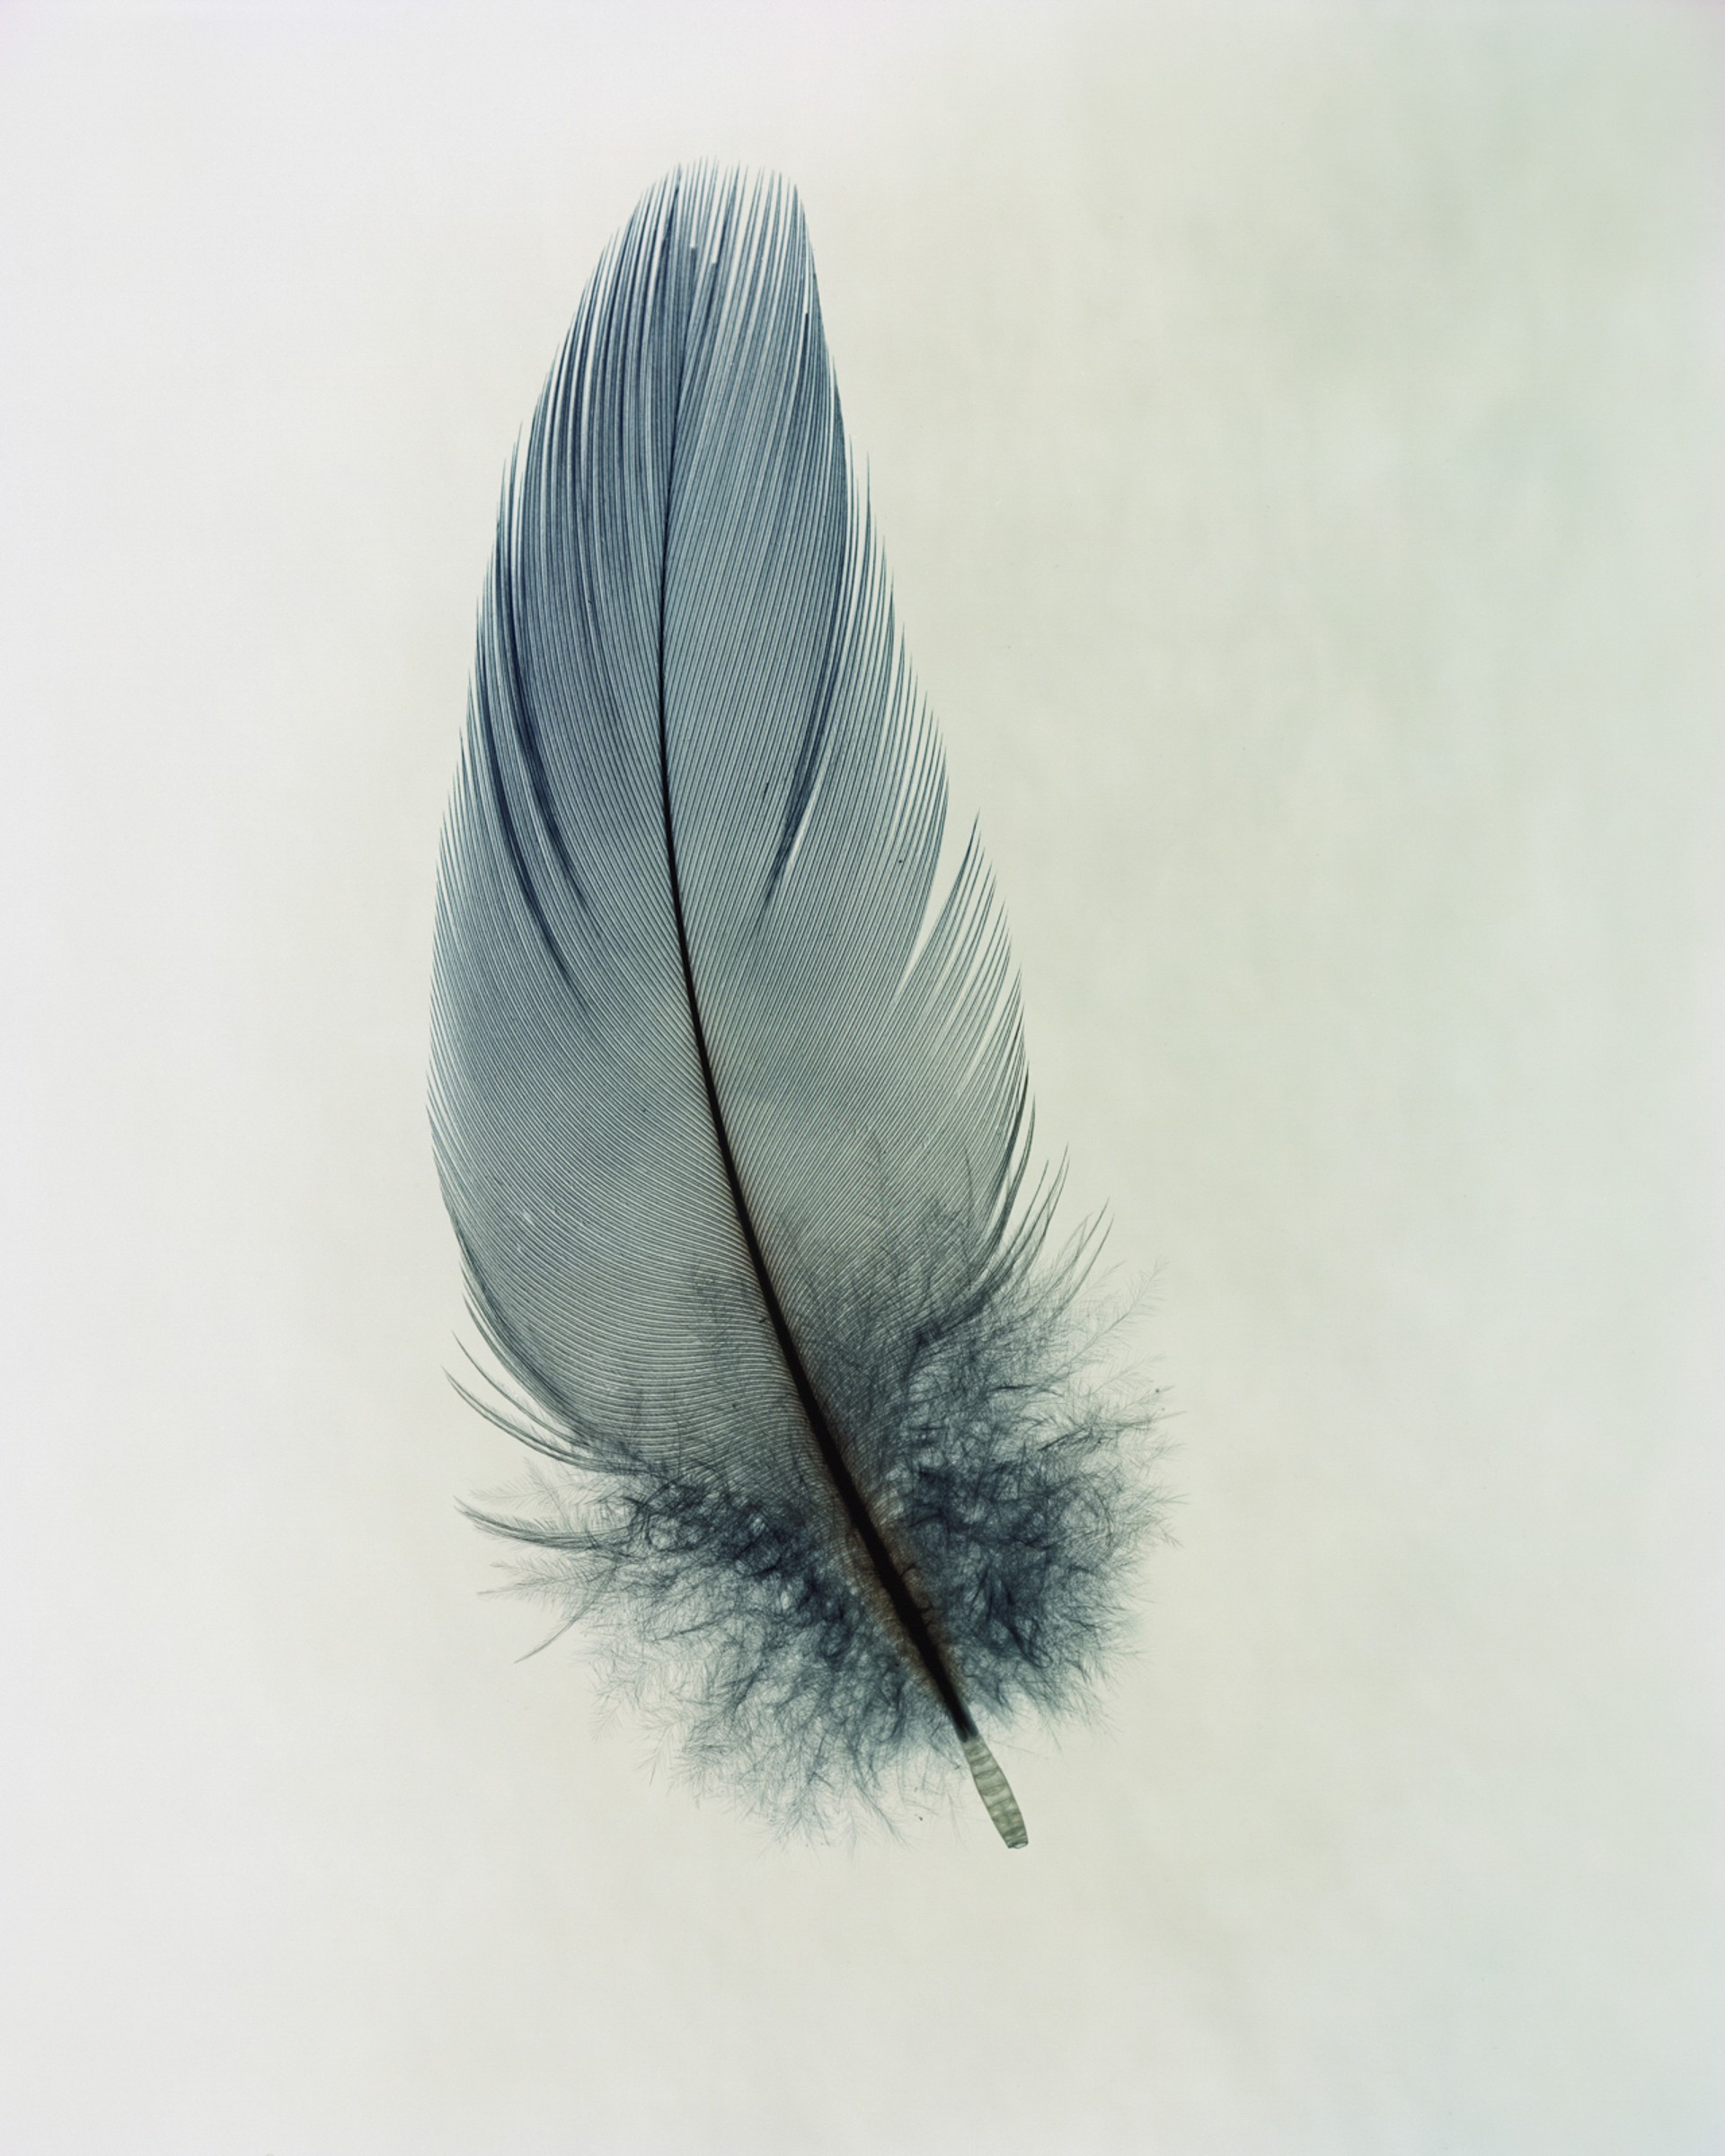 Feather Study #2 by Taylor Curry